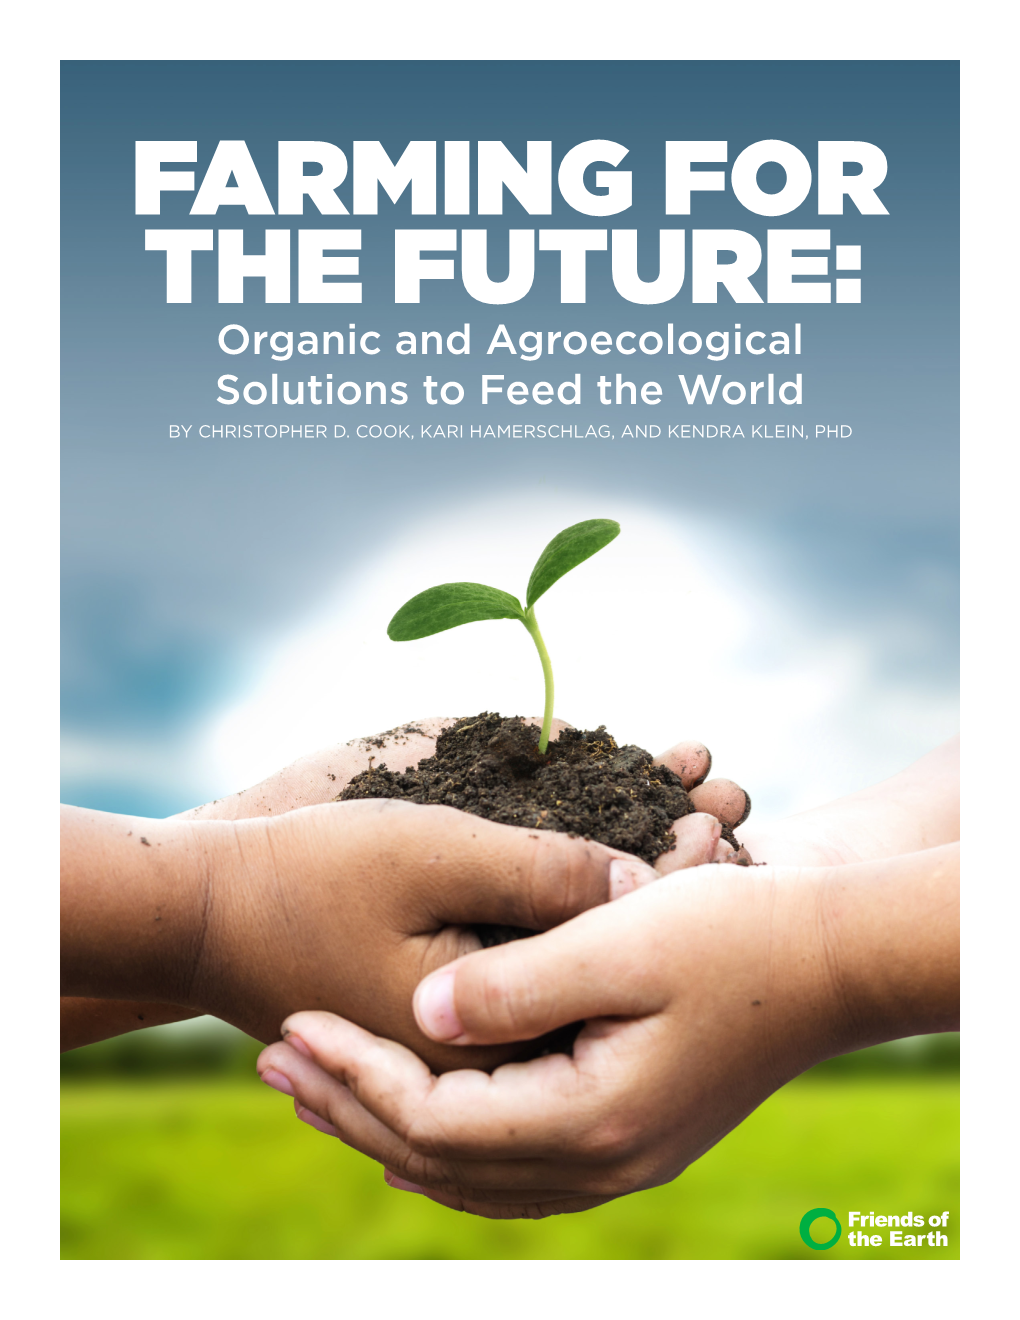 FARMING for the FUTURE: Organic and Agroecological Solutions to Feed the World by CHRISTOPHER D